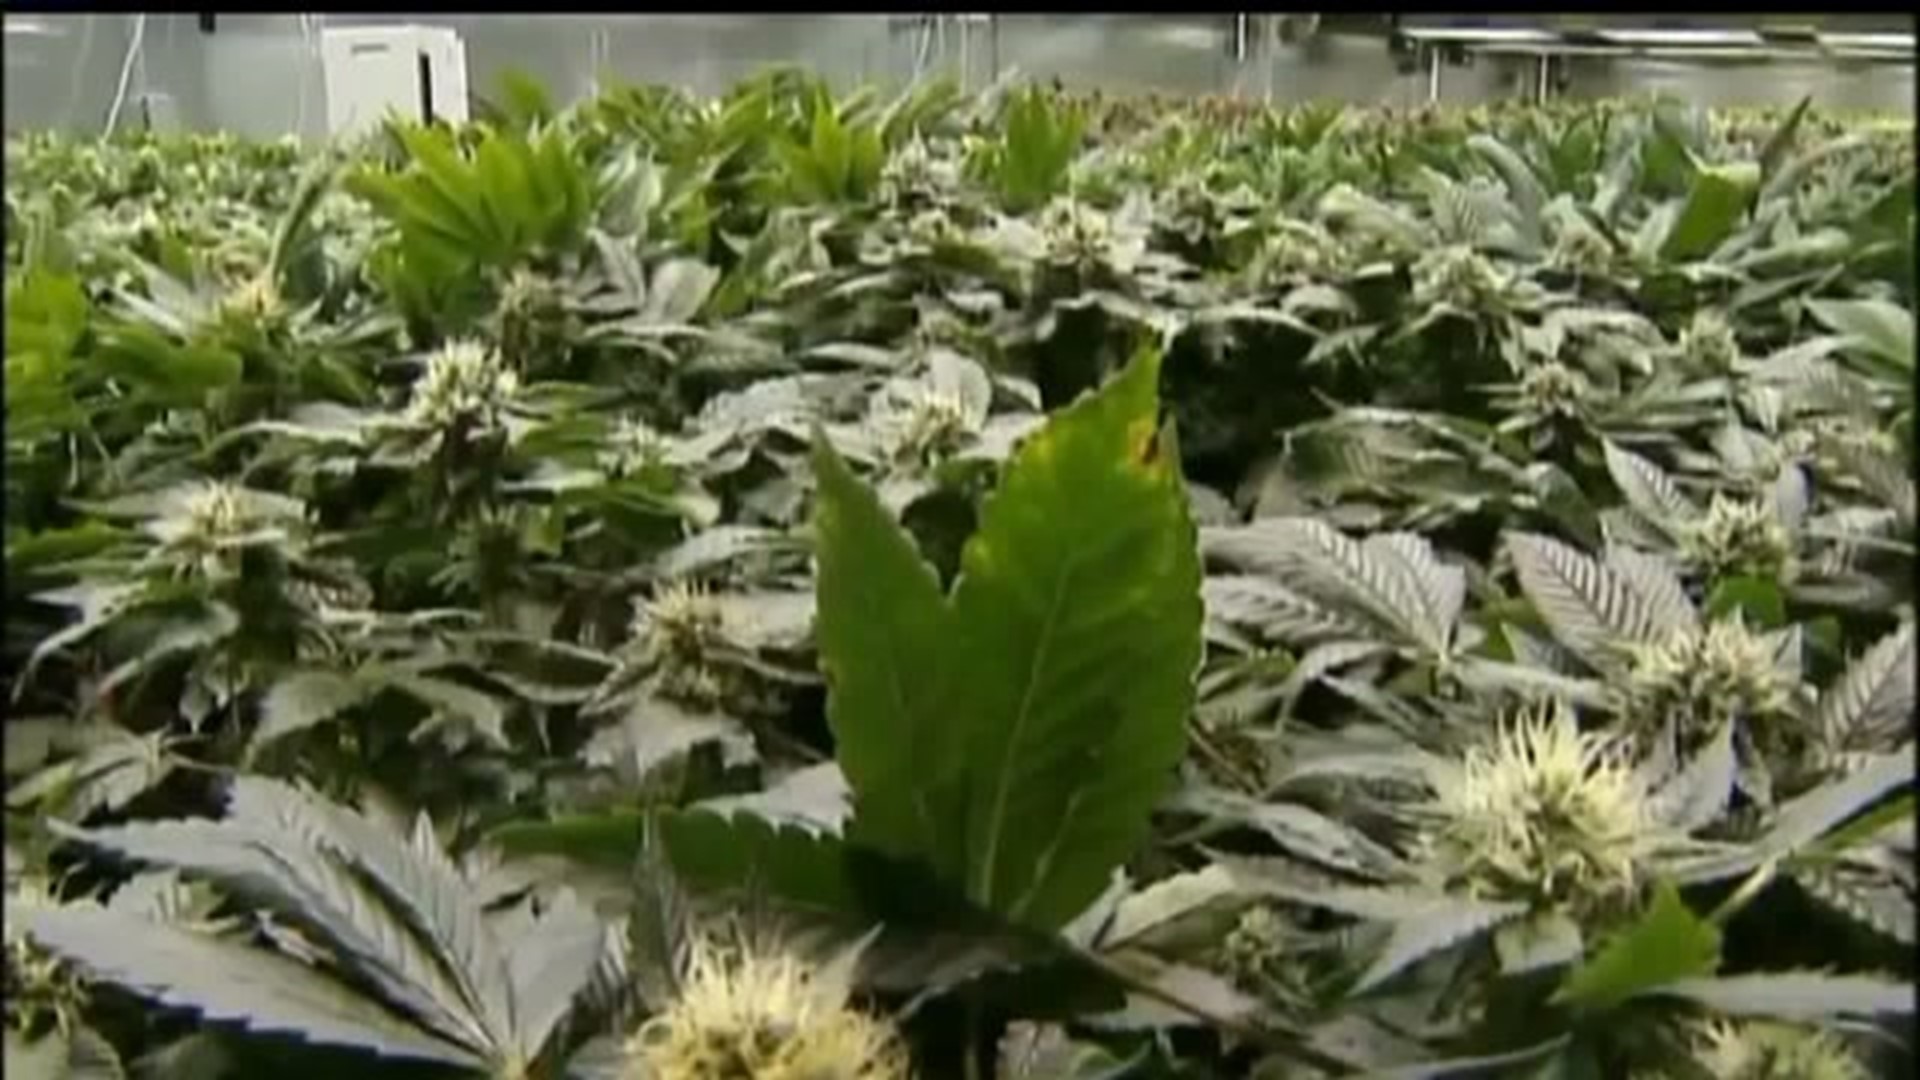 City Council to hold press conference today to seek public input on lowering penalties for marijuana